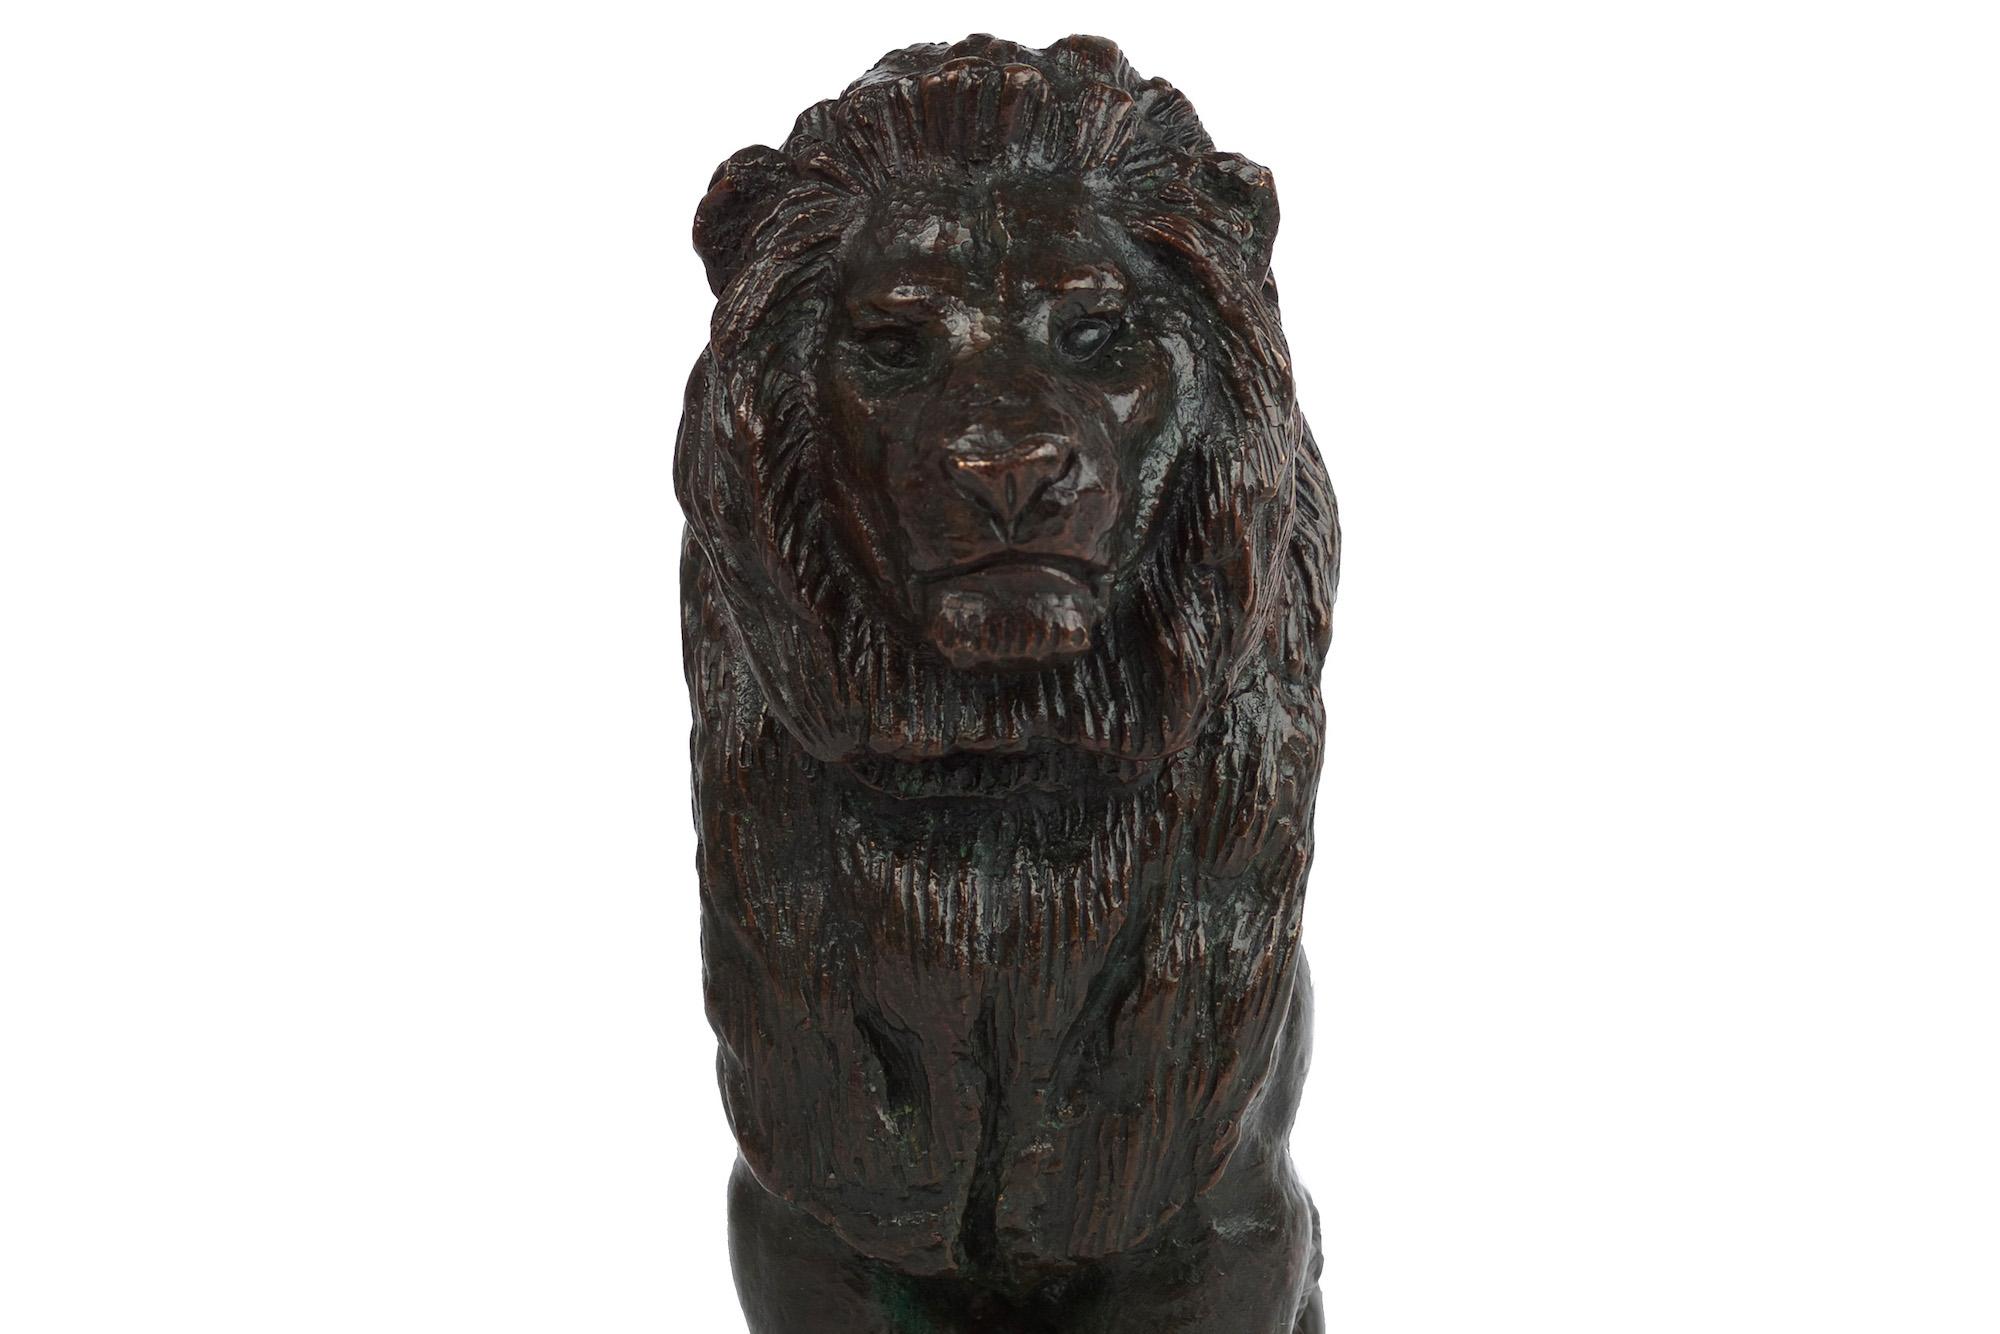 19th Century Rare French Antique Bronze Sculpture “Lion Assis no.2” after Antoine-Louis Barye